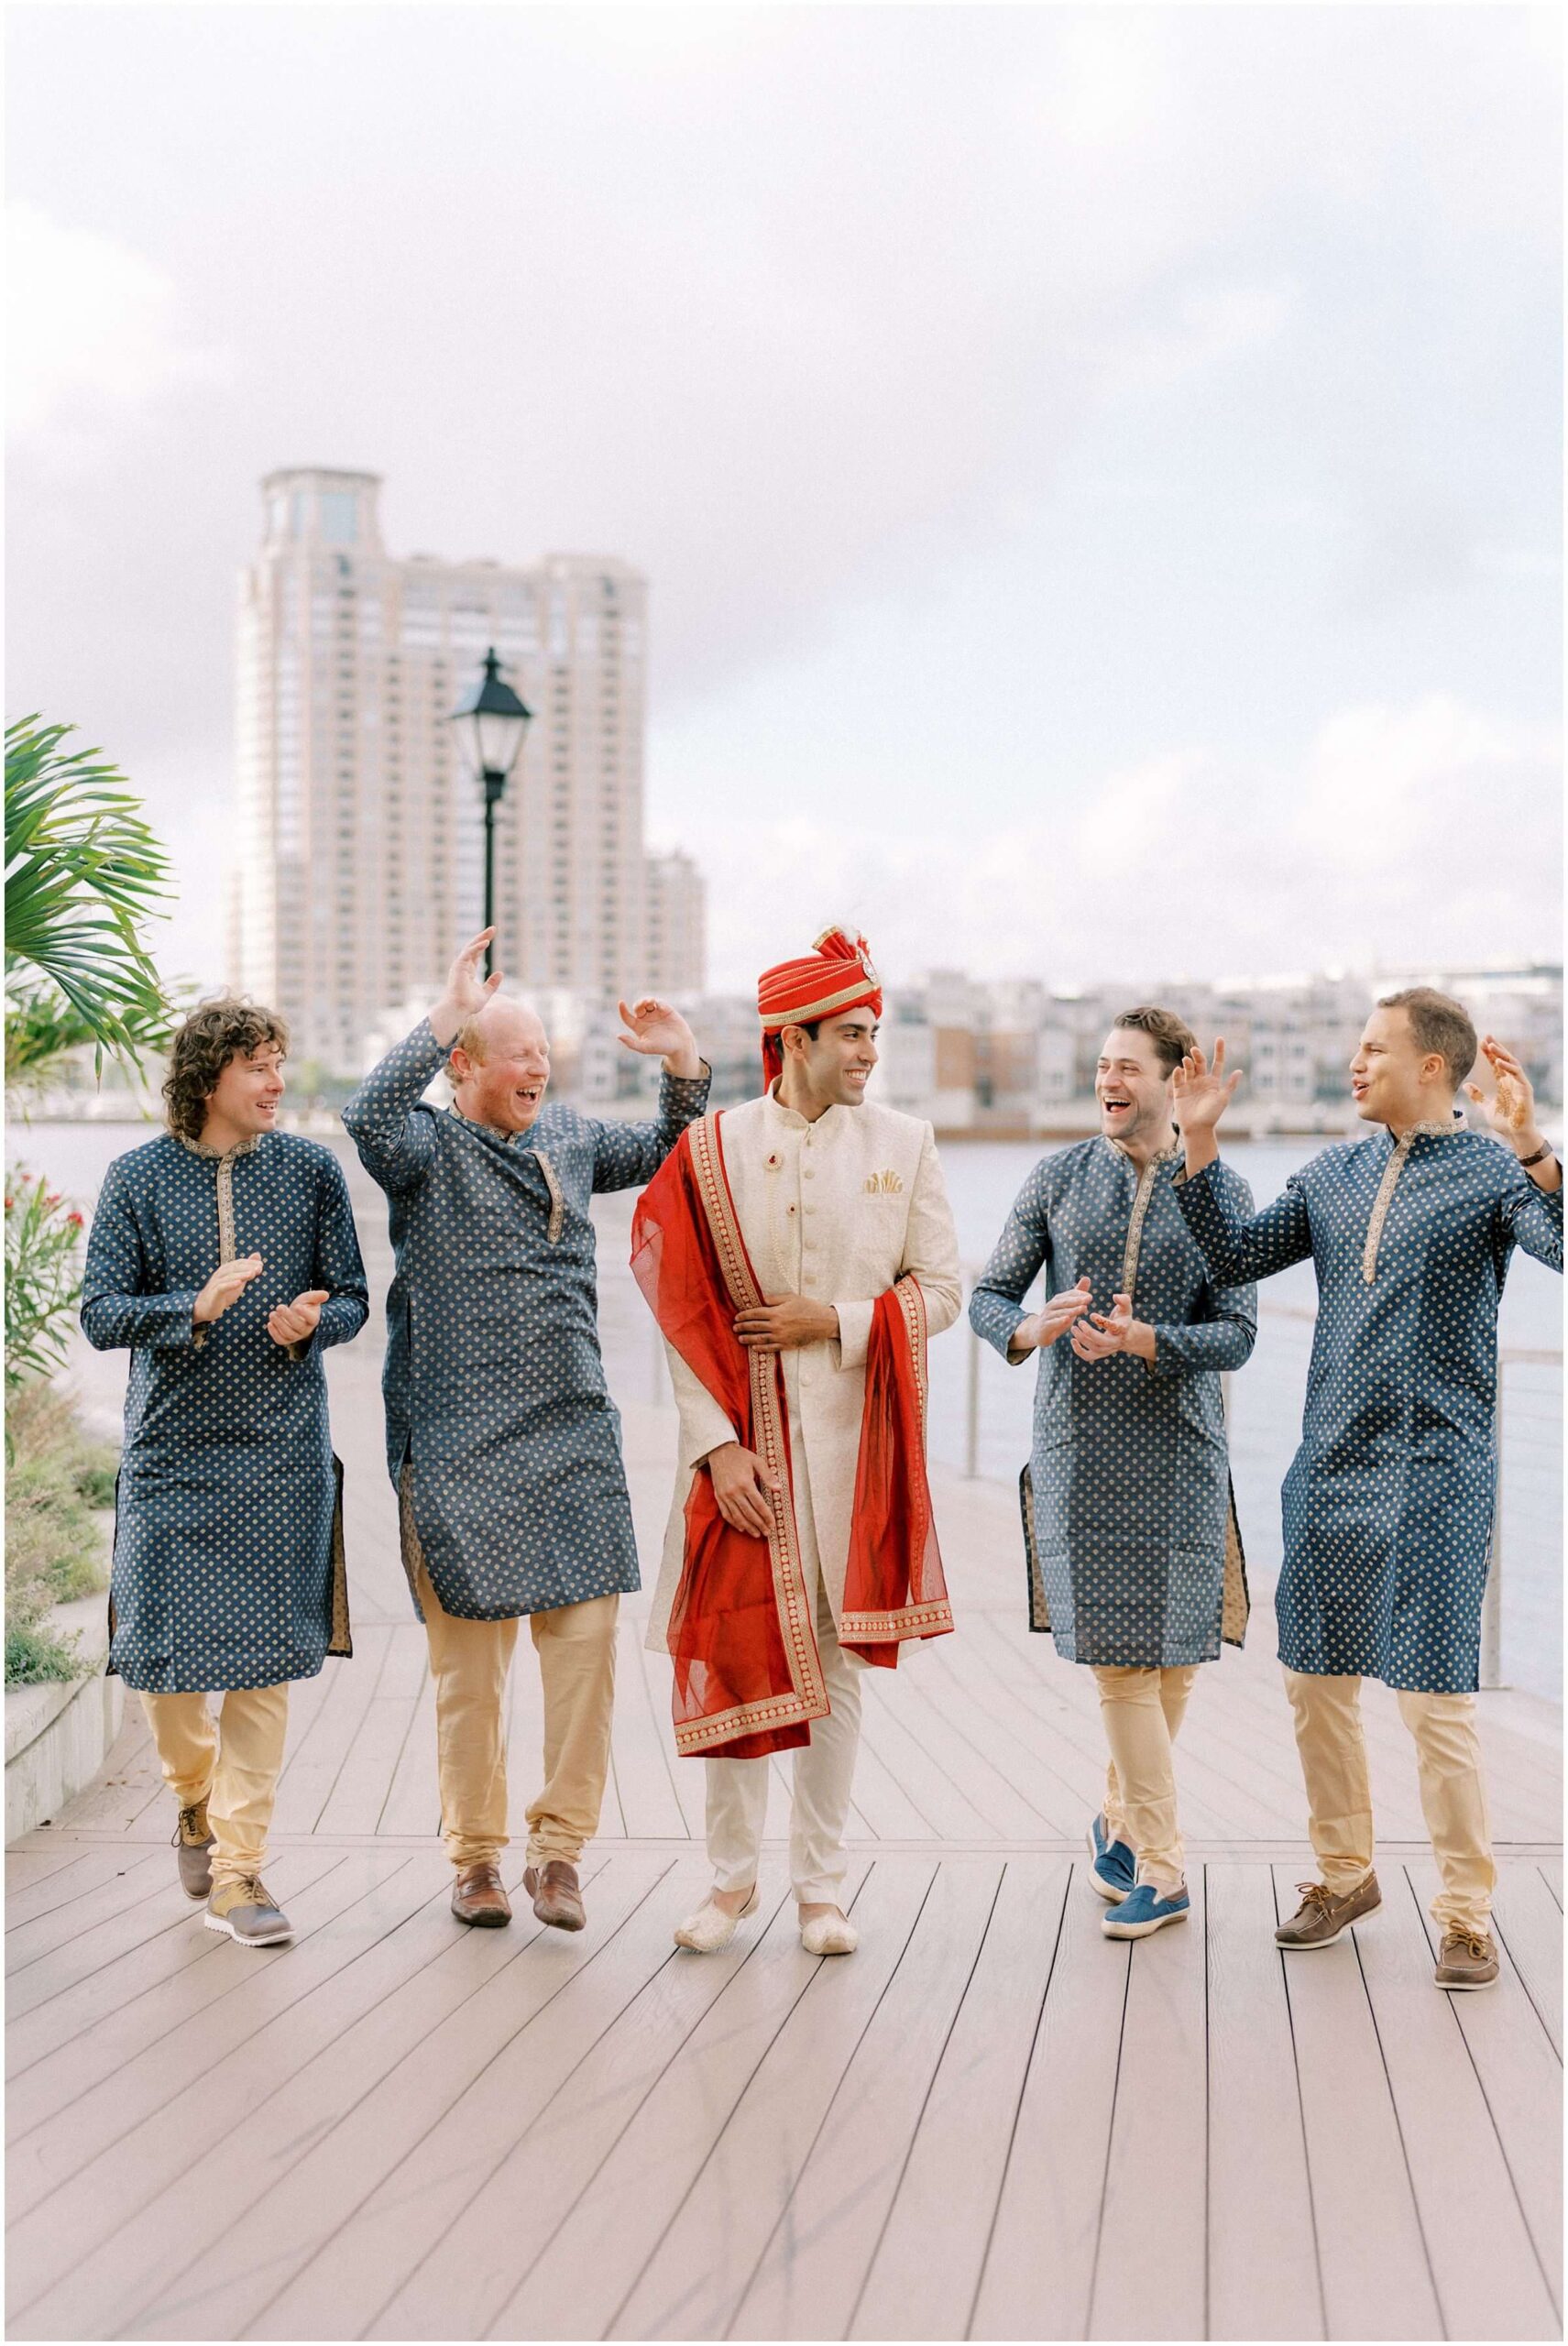 Baraat wedding festivities in the Inner Harbor of Baltimore. Photographed by multicultural wedding photographer Winnie Dora Photography.